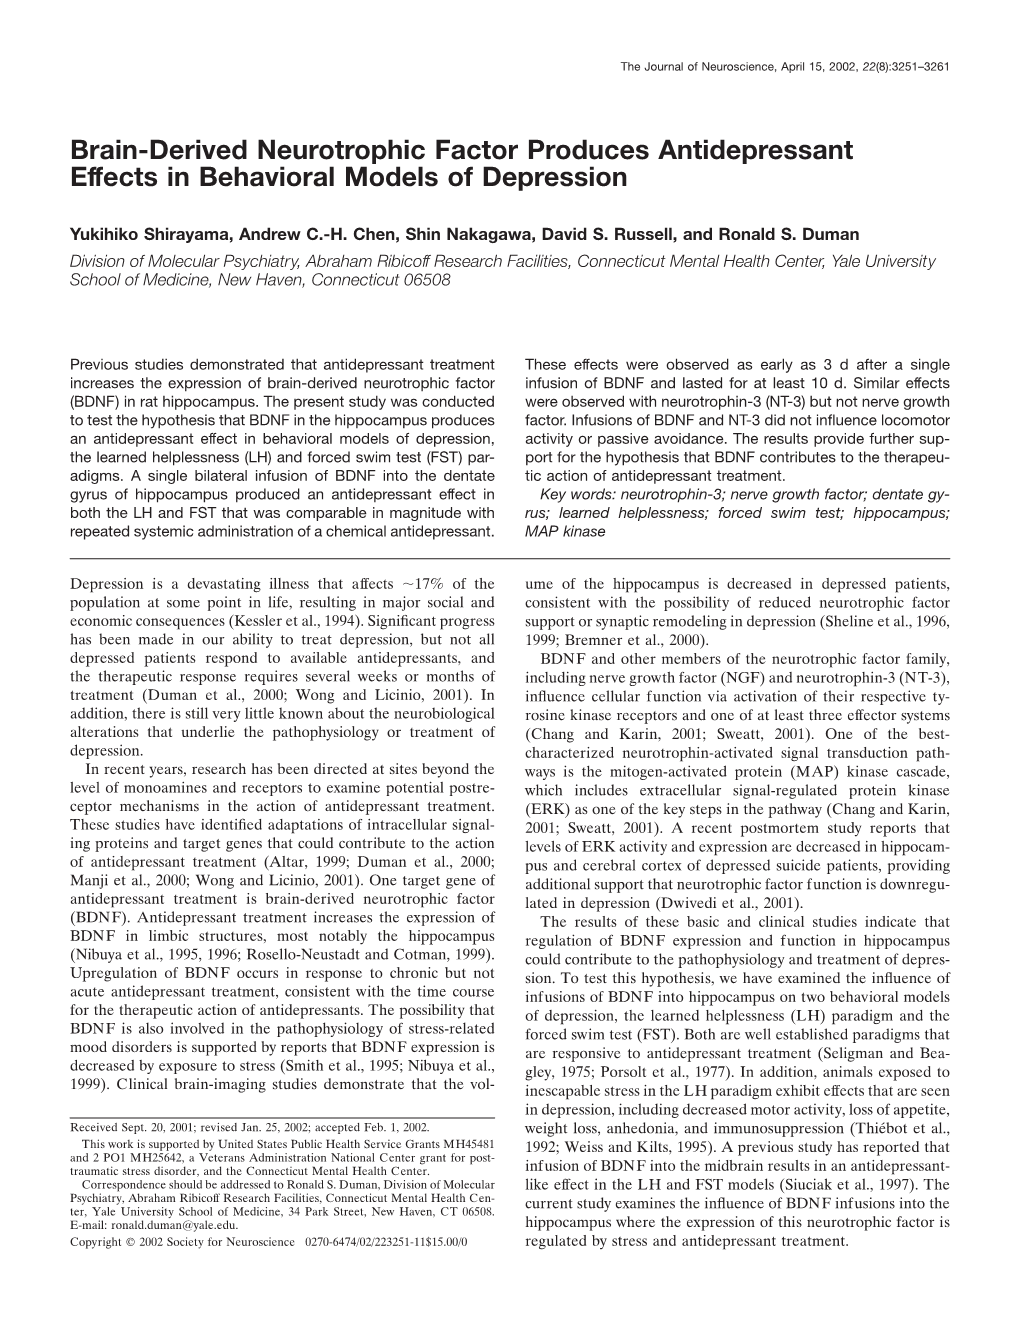 Brain-Derived Neurotrophic Factor Produces Antidepressant Effects in Behavioral Models of Depression